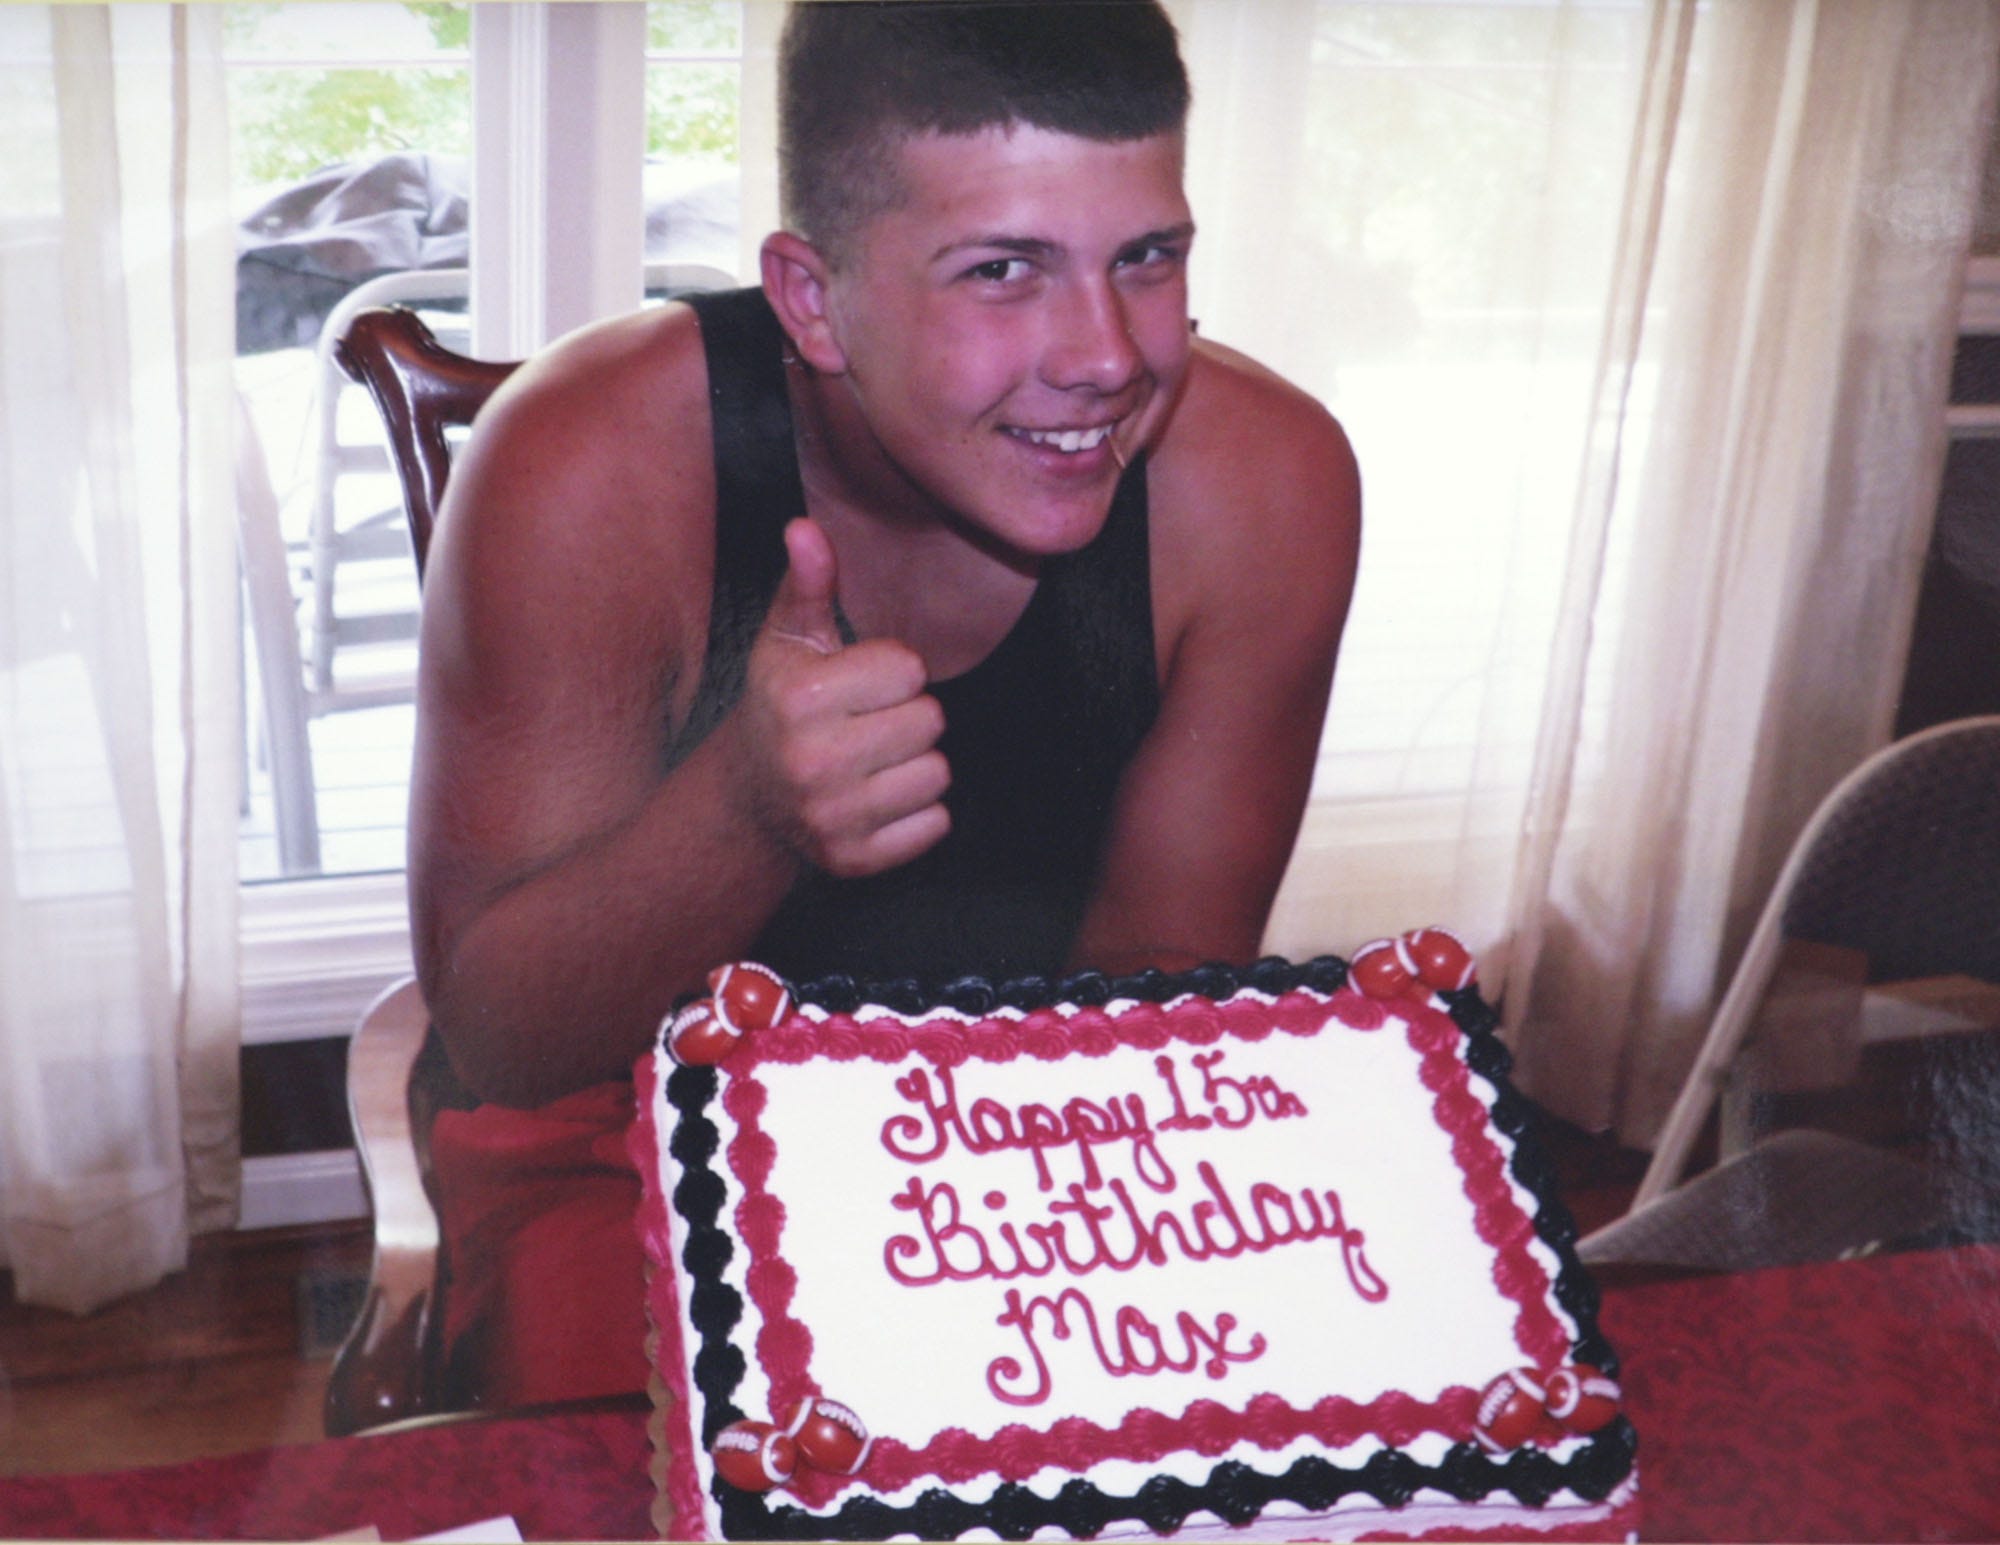 A picture of Max Gilpin on his 15th birthday. Aug. 24, 2008